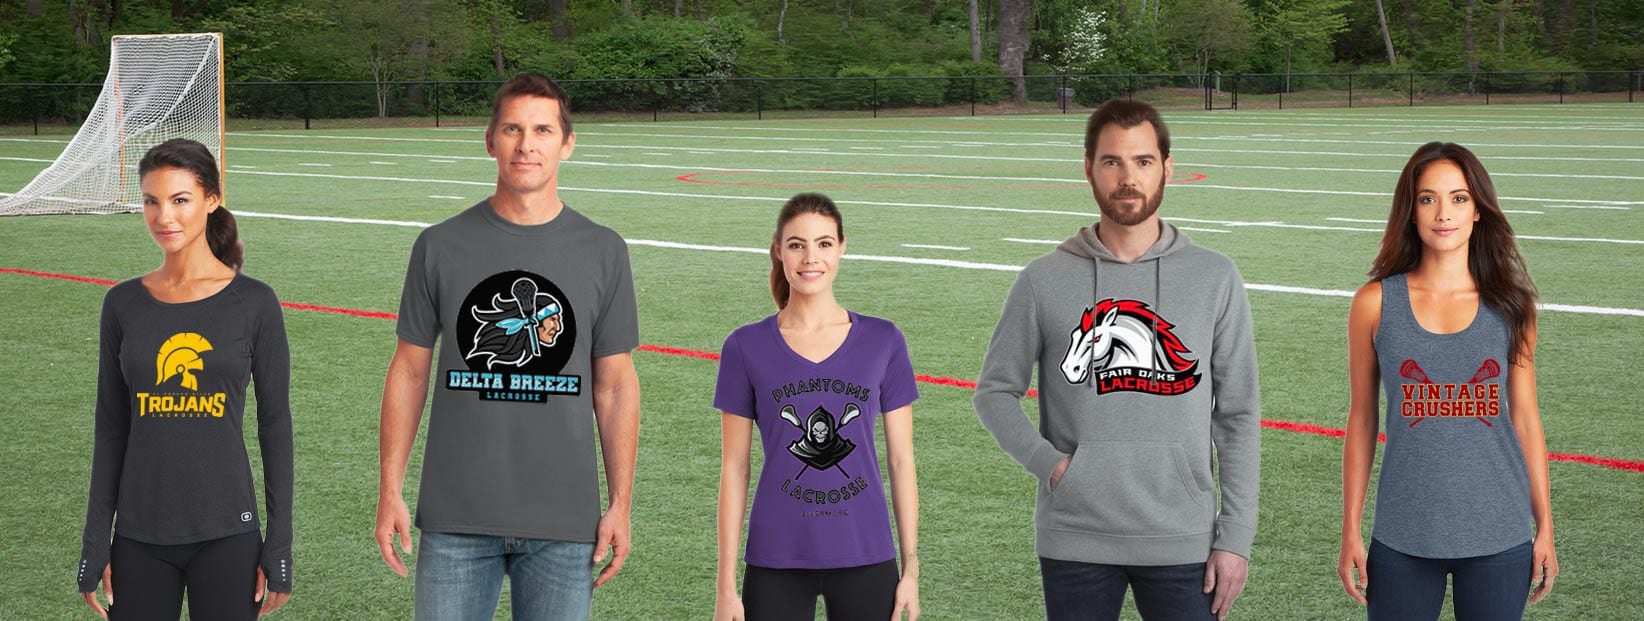 Spirit wear and team stores from Lacrosse Fanatic